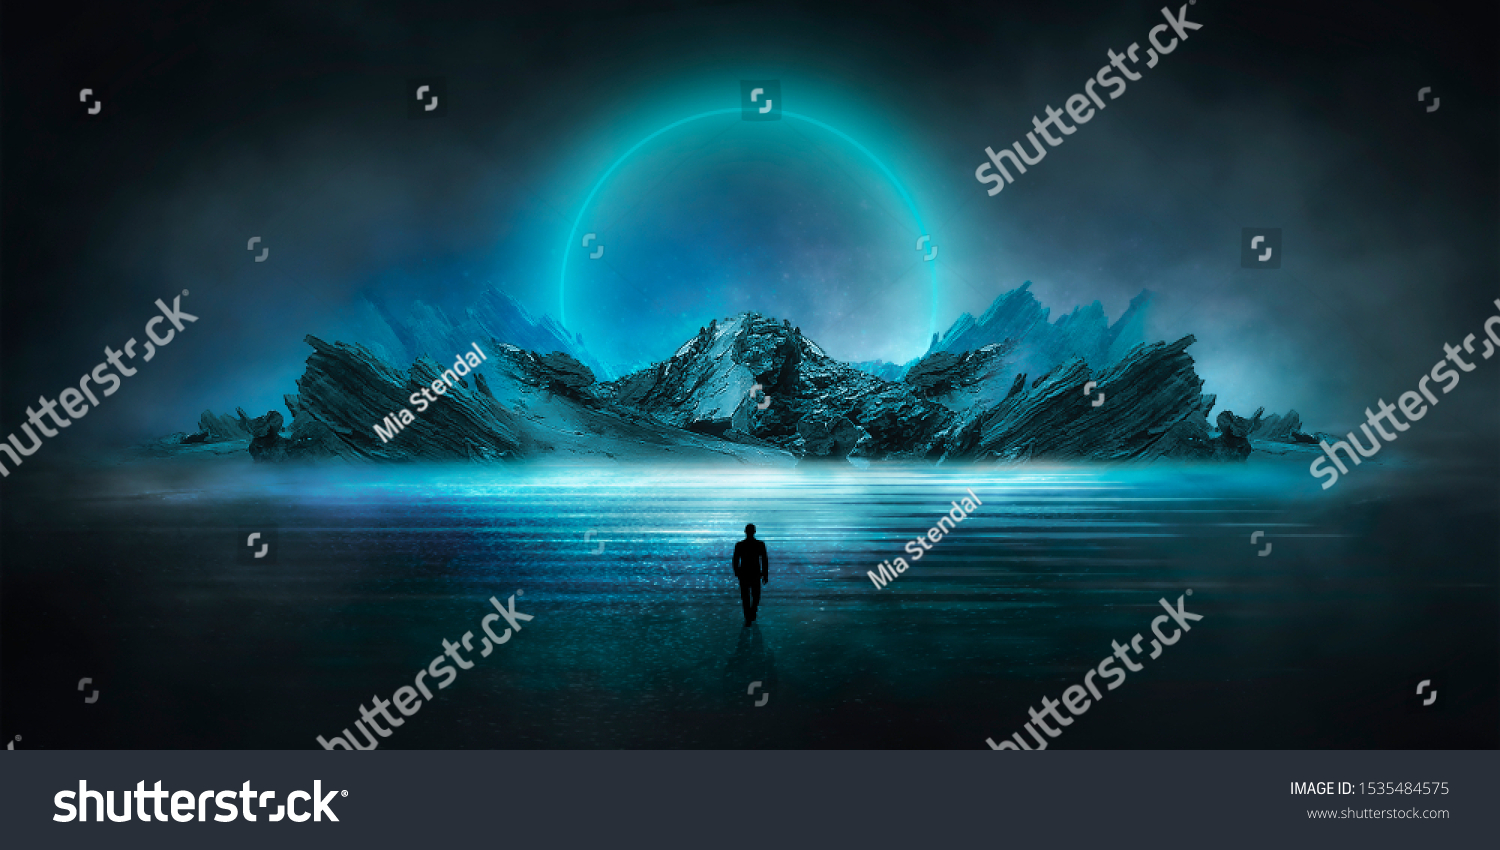 Futuristic night landscape with abstract landscape and island, moonlight, shine. Dark natural scene with reflection of light in the water, neon blue light. Dark neon circle background. #1535484575